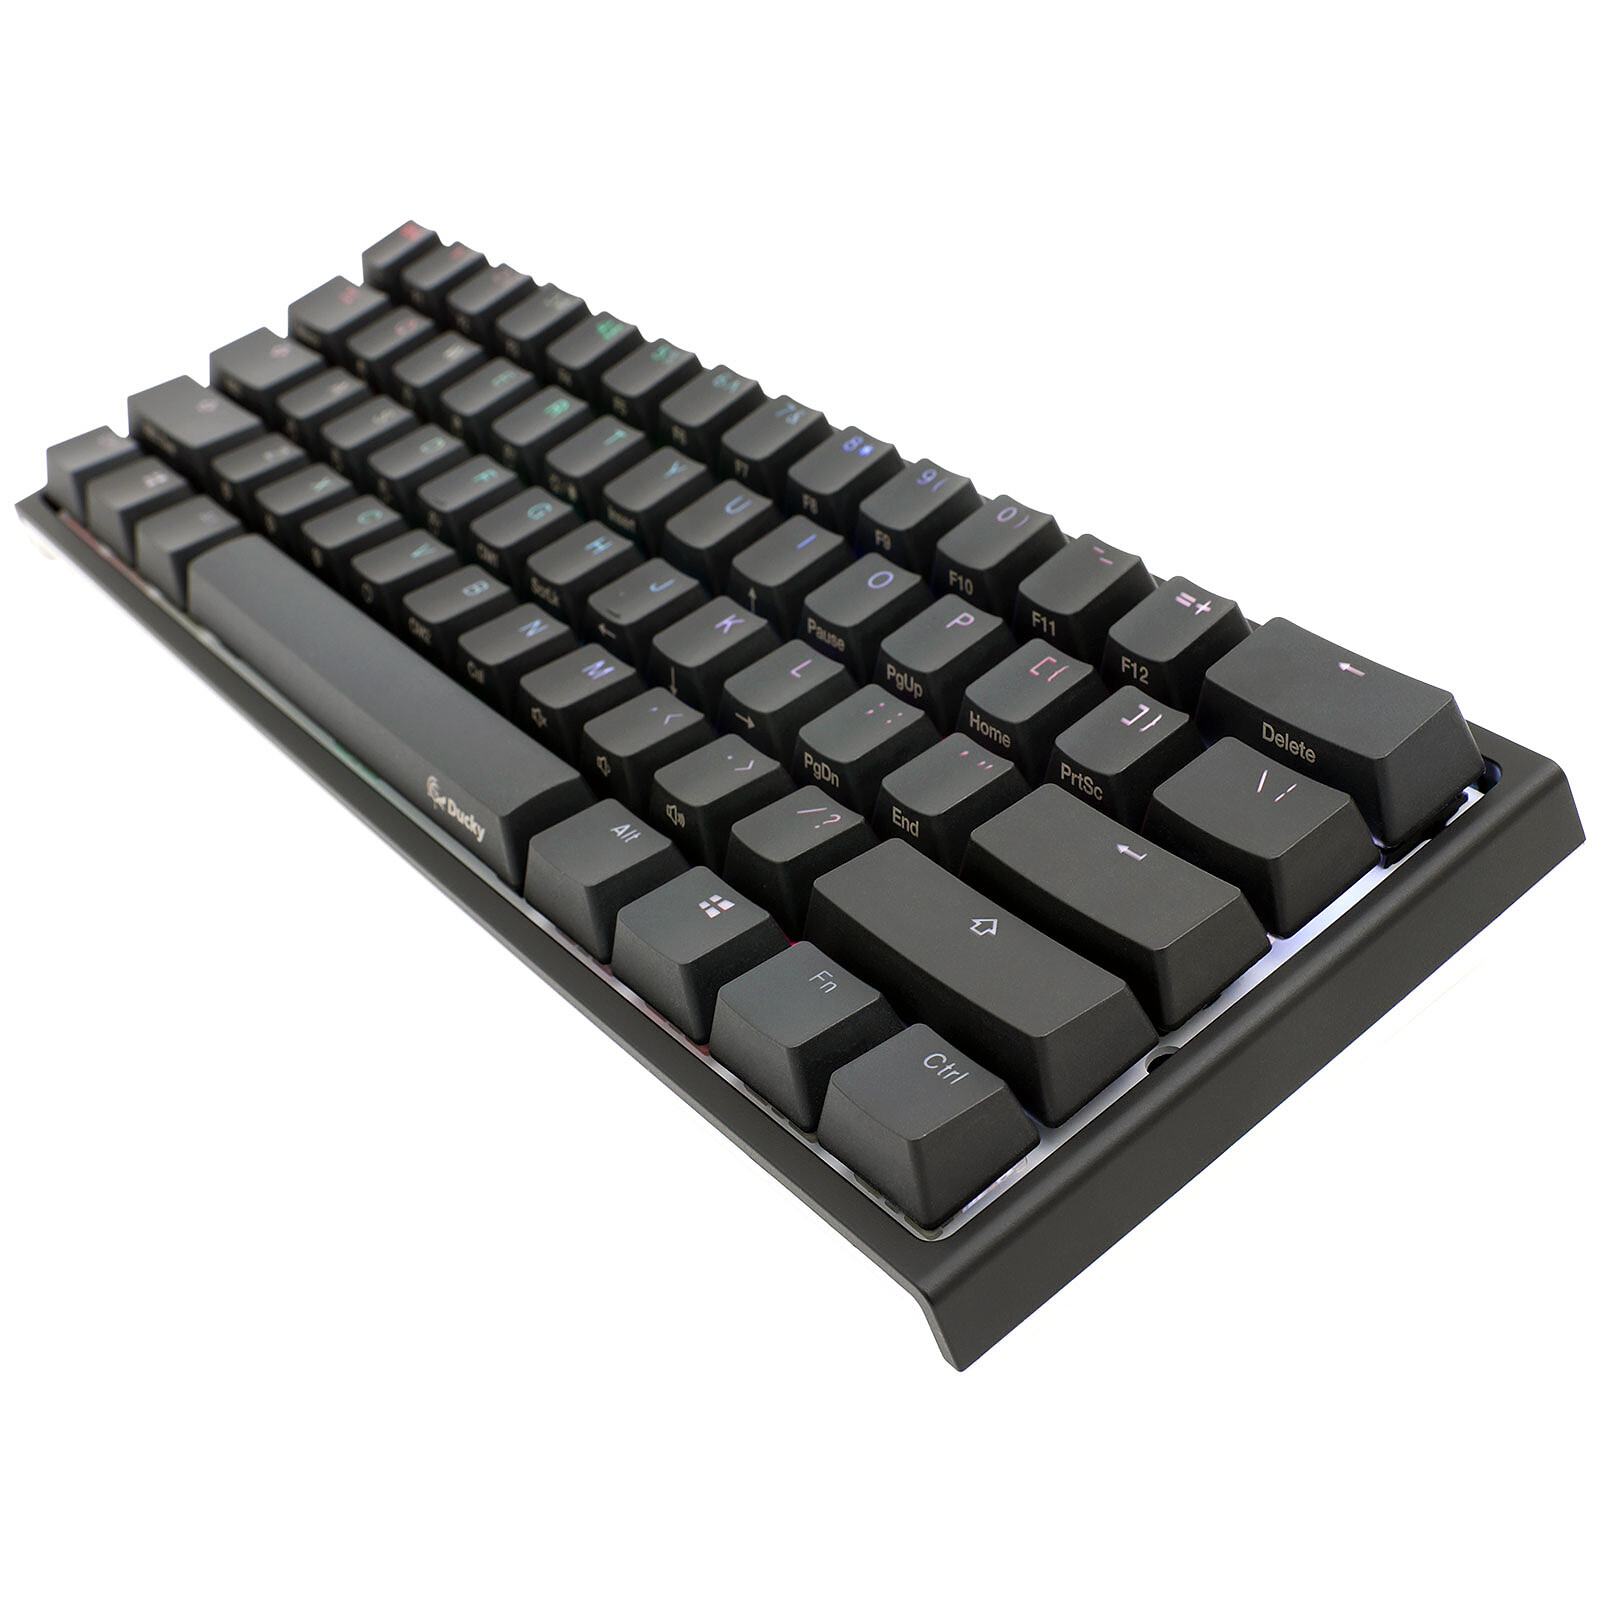 Channel One 2 Mini RGB (Cherry MX RGB Red) - Keyboard Ducky Channel on LDLC